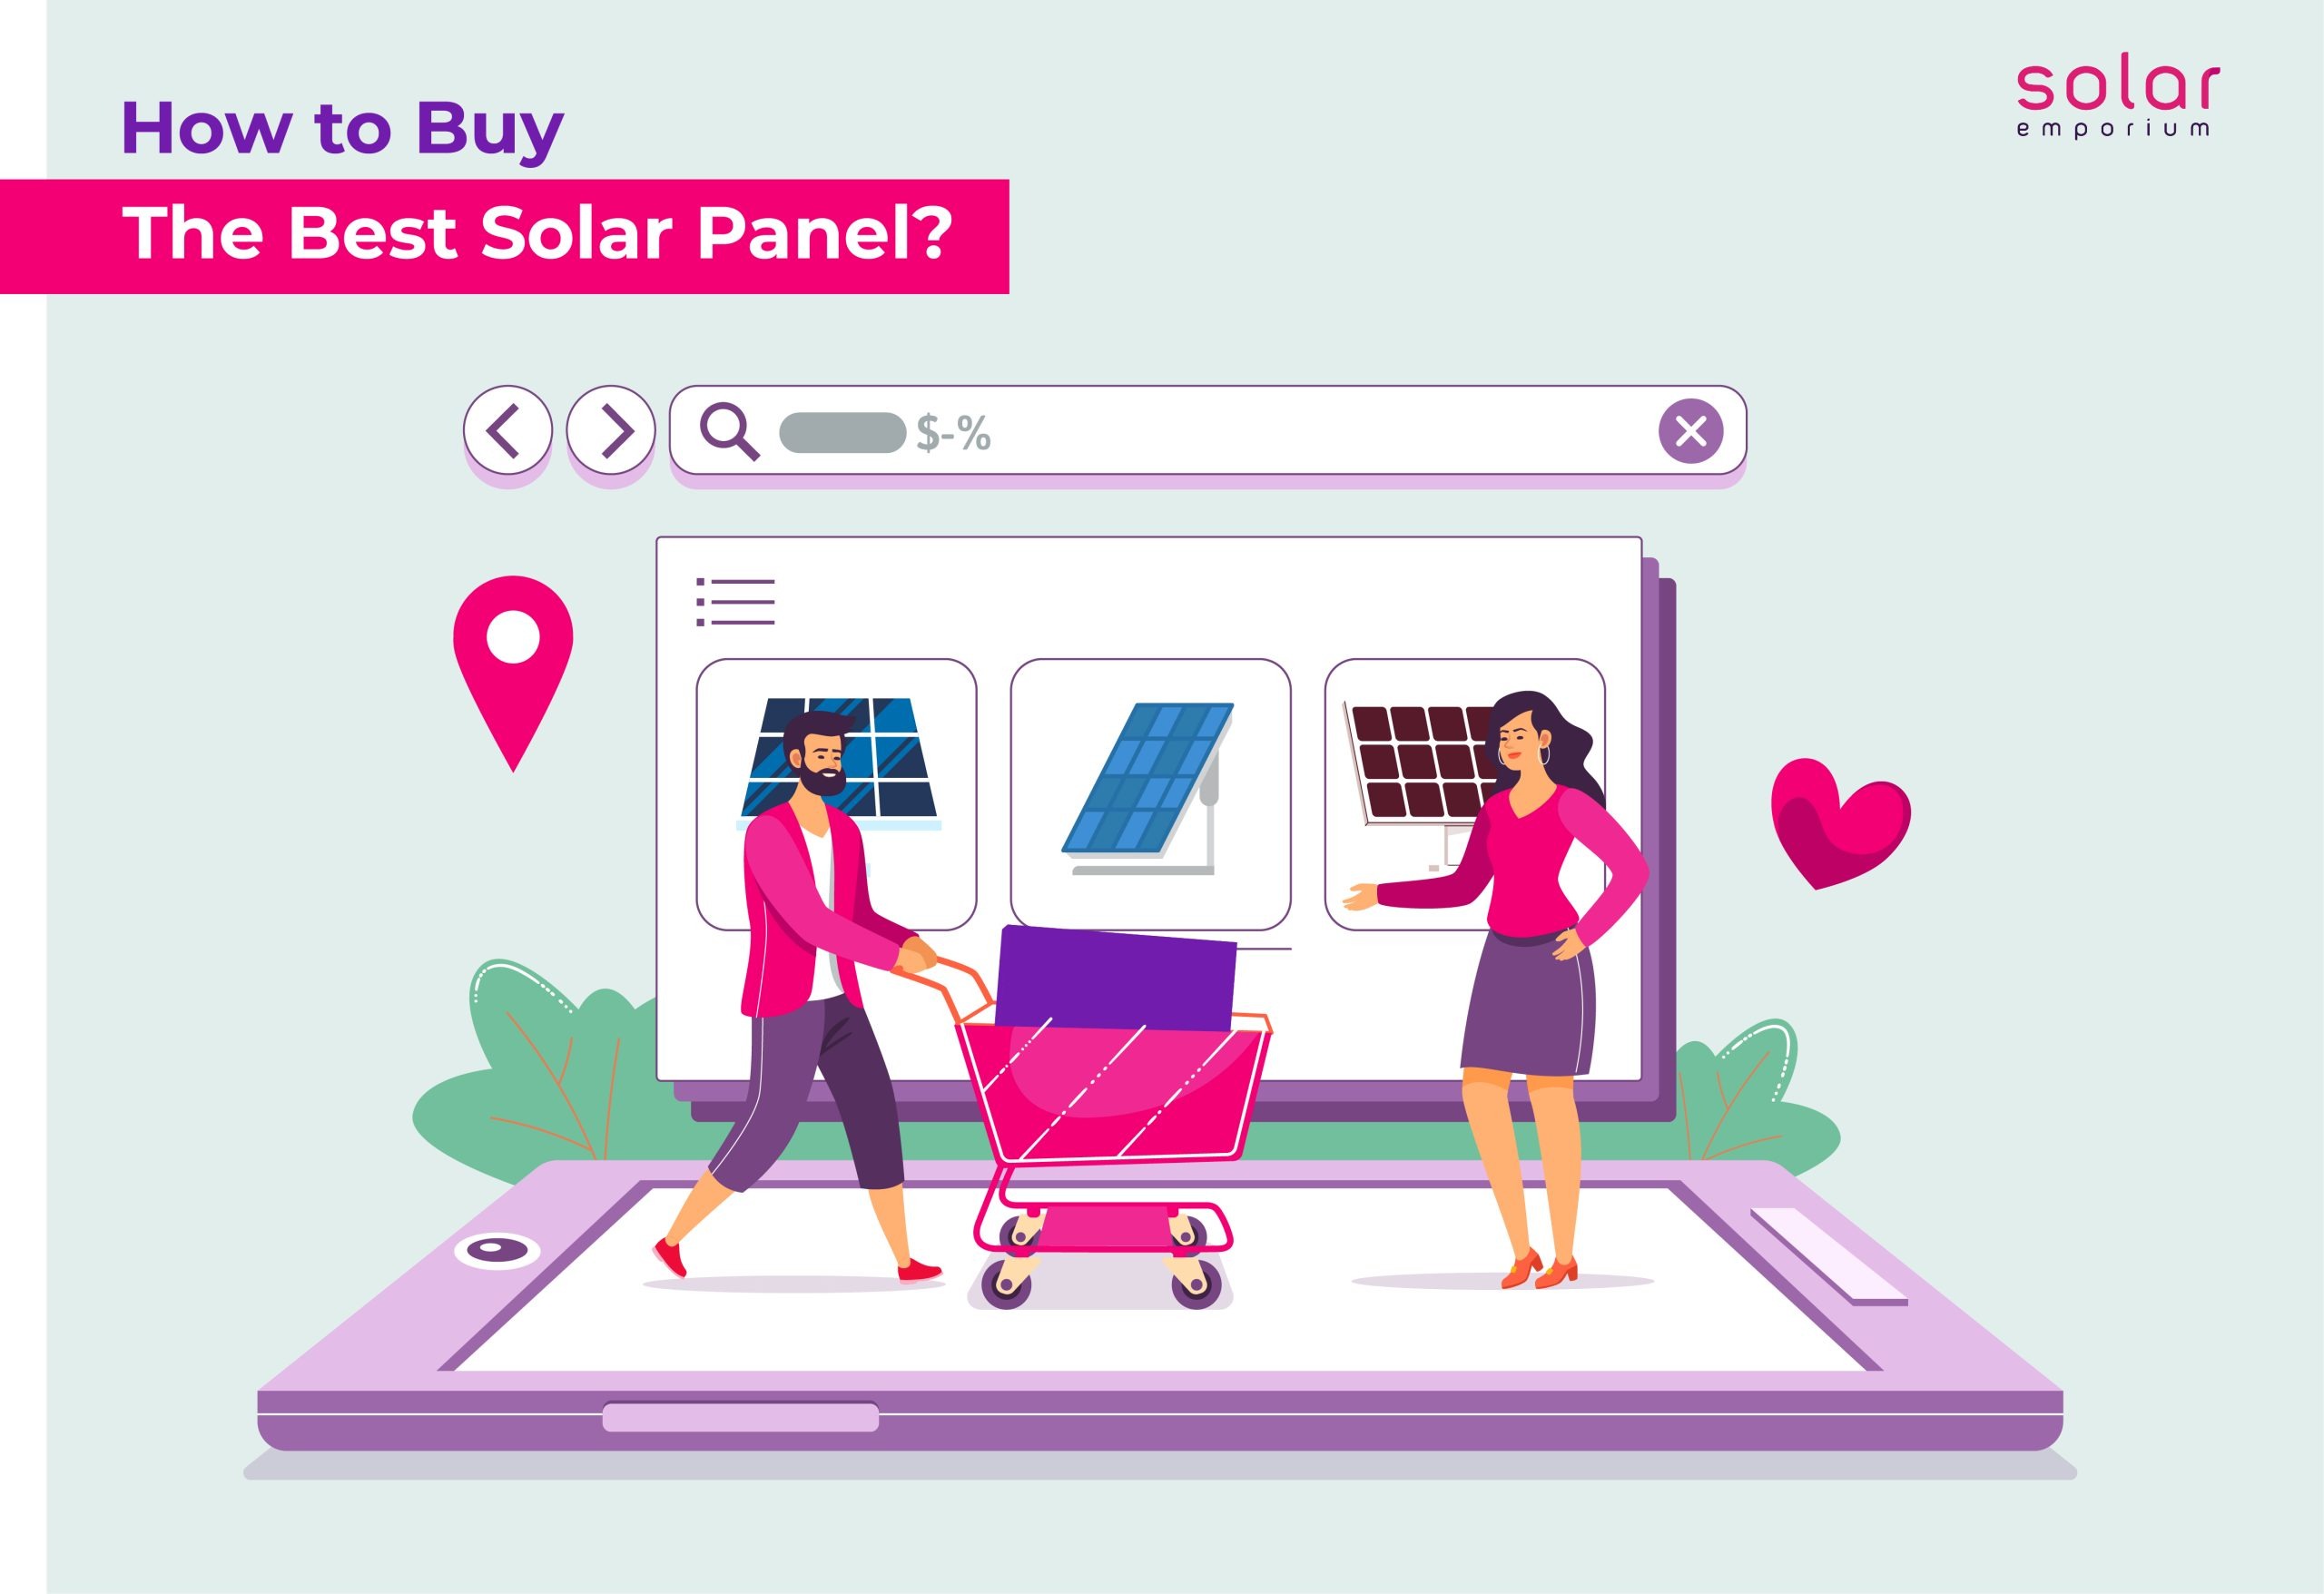 How to Buy the Best Solar Panel